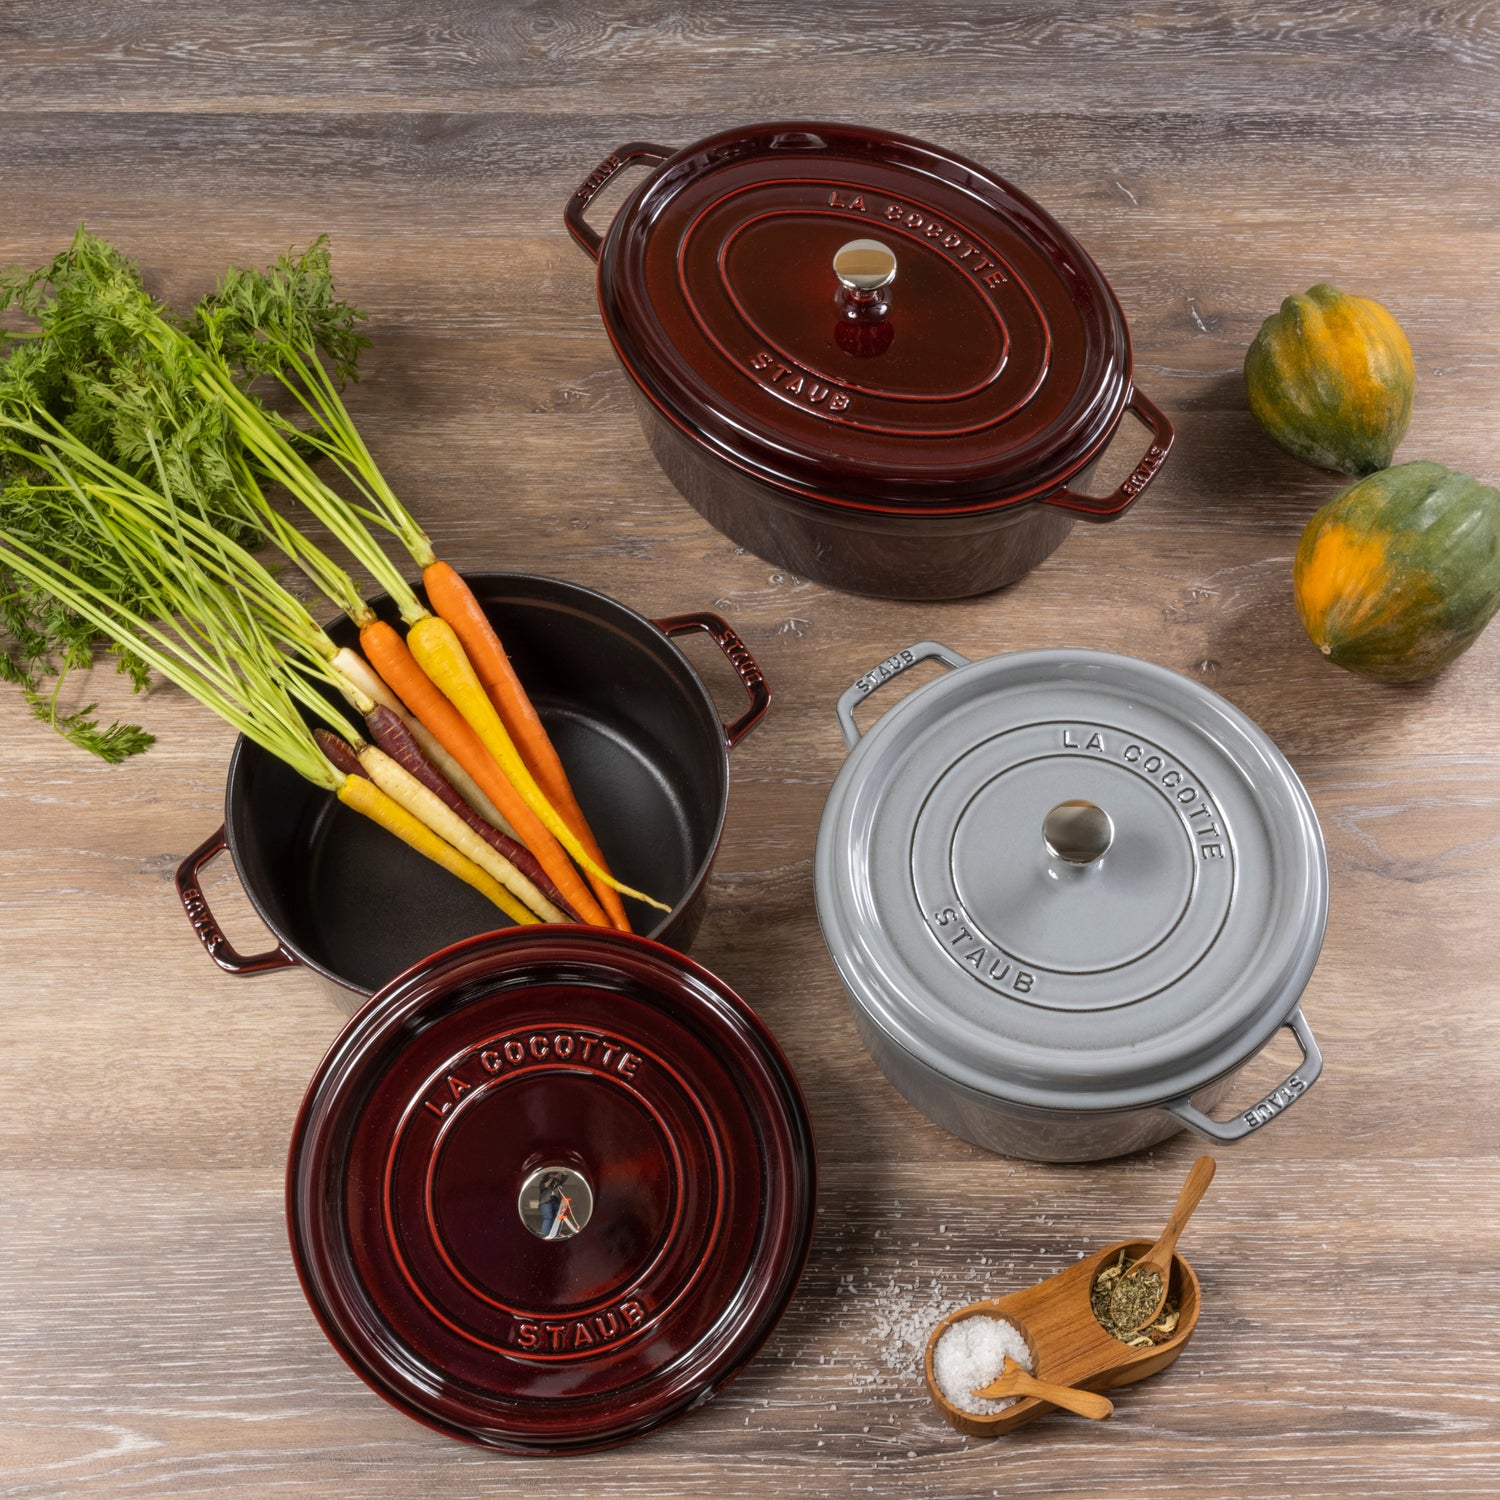 Le Creuset Round Graphite Grey Enameled Cast Iron Dutch Oven with Lid